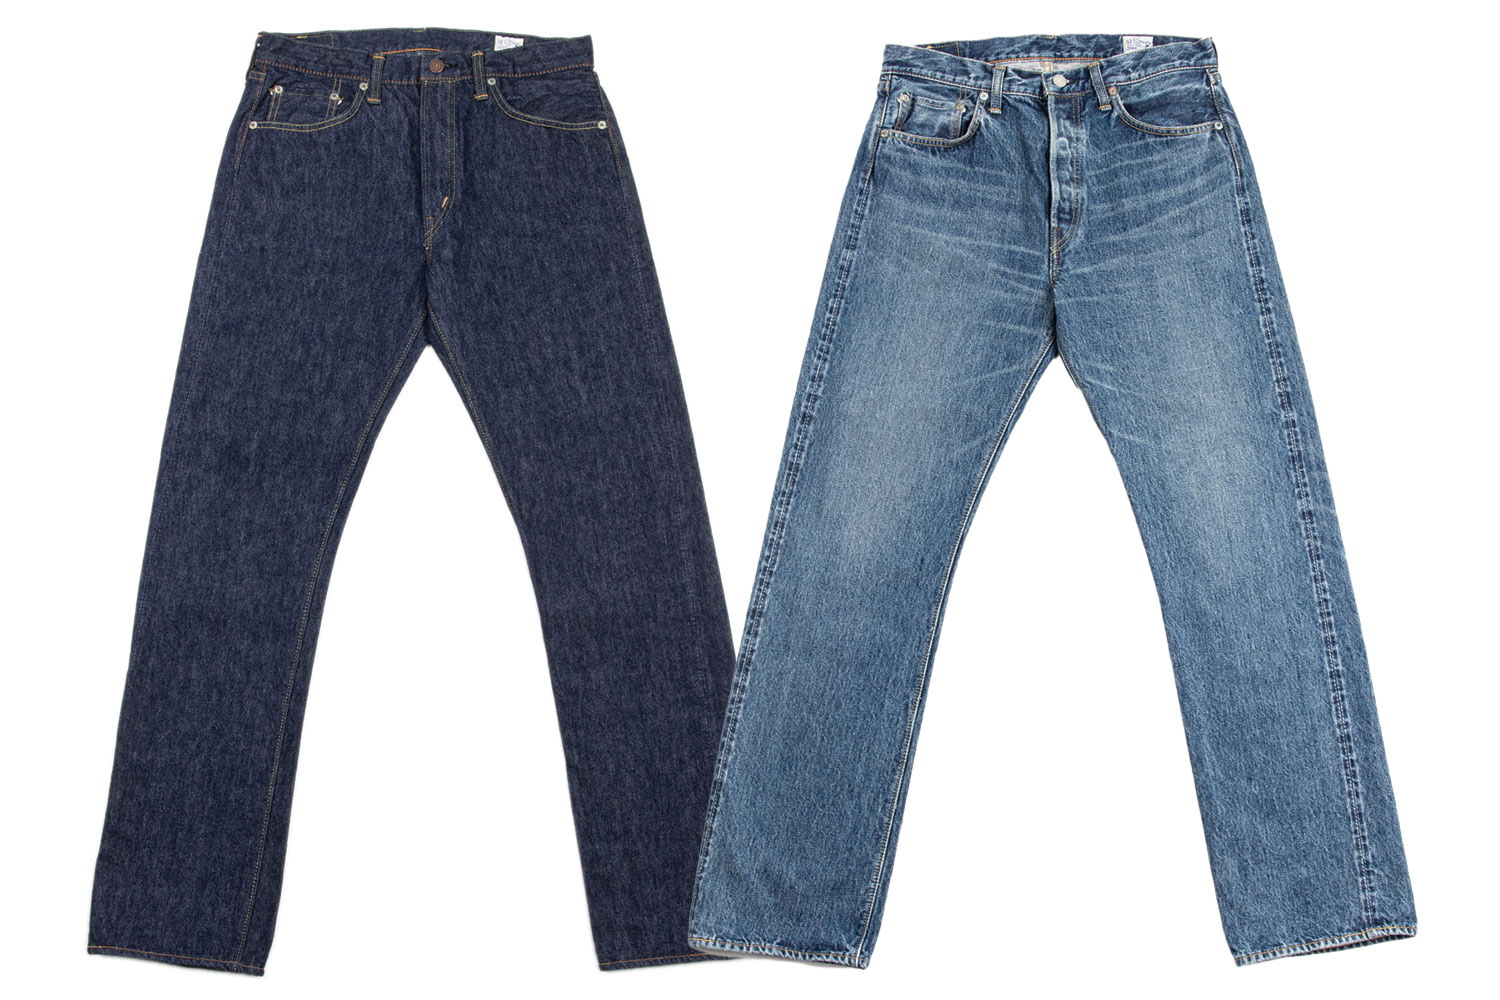 Two pairs of Orslow jeans